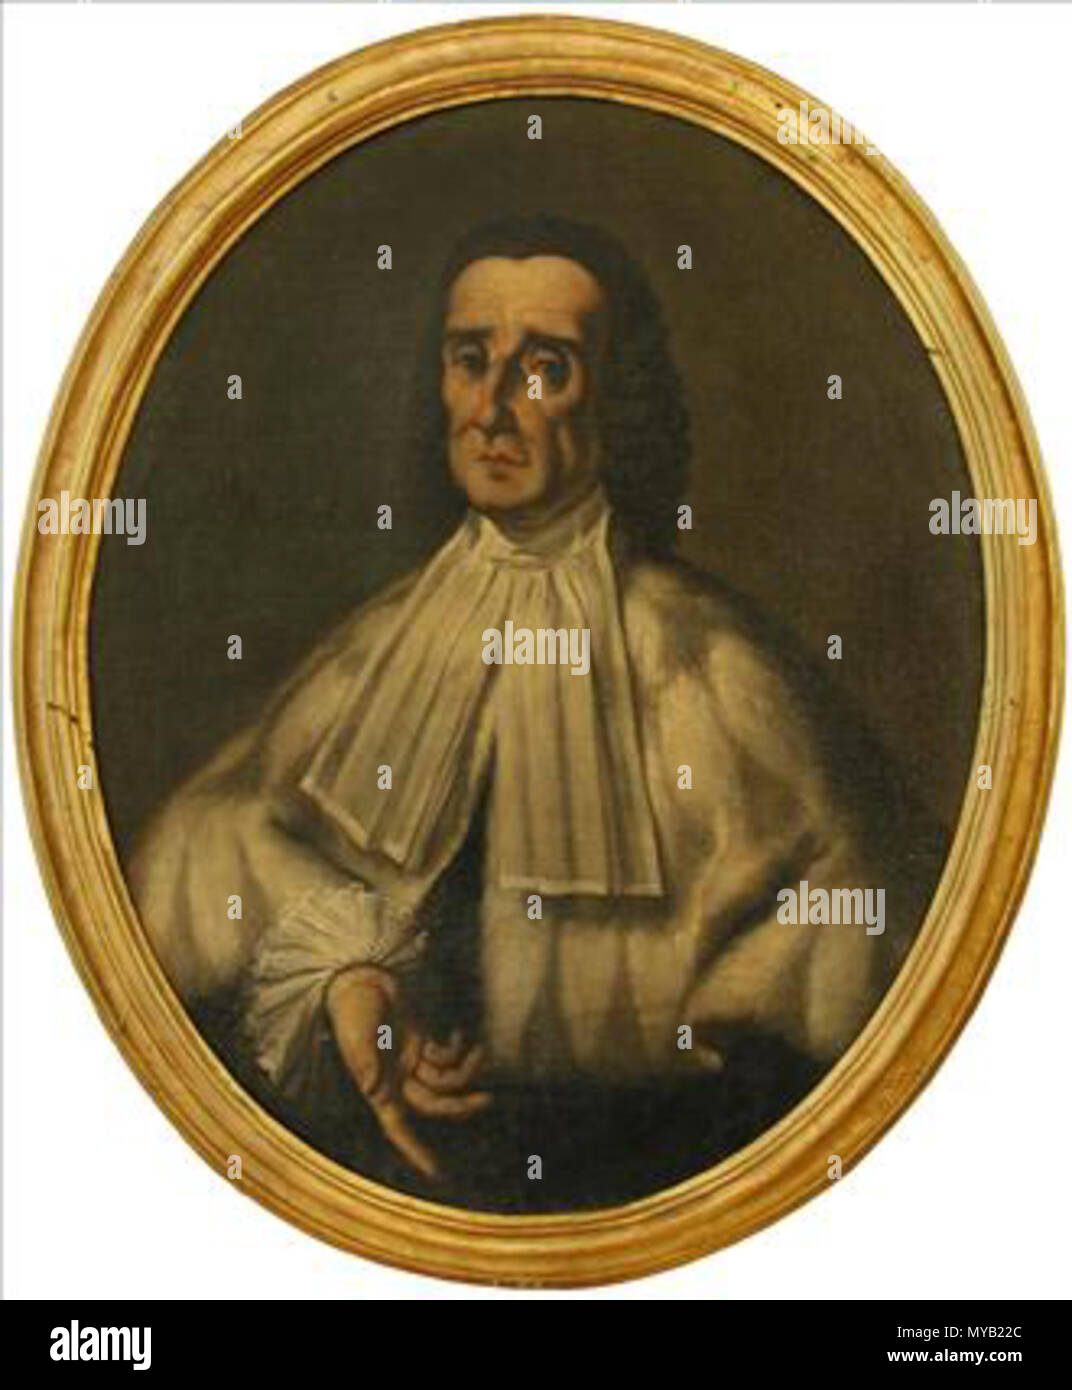 . English: Jacopo Bartolomeo Beccari (25 July 1682 - 18 January 1766 ), an Italian chemist, one of the leading scientists in Bologna in the first half of the eighteenth century. He is mainly known as the discoverer of the gluten in wheat flour. before 1767. University of Bologna 64 Bartolomeo Beccari Stock Photo